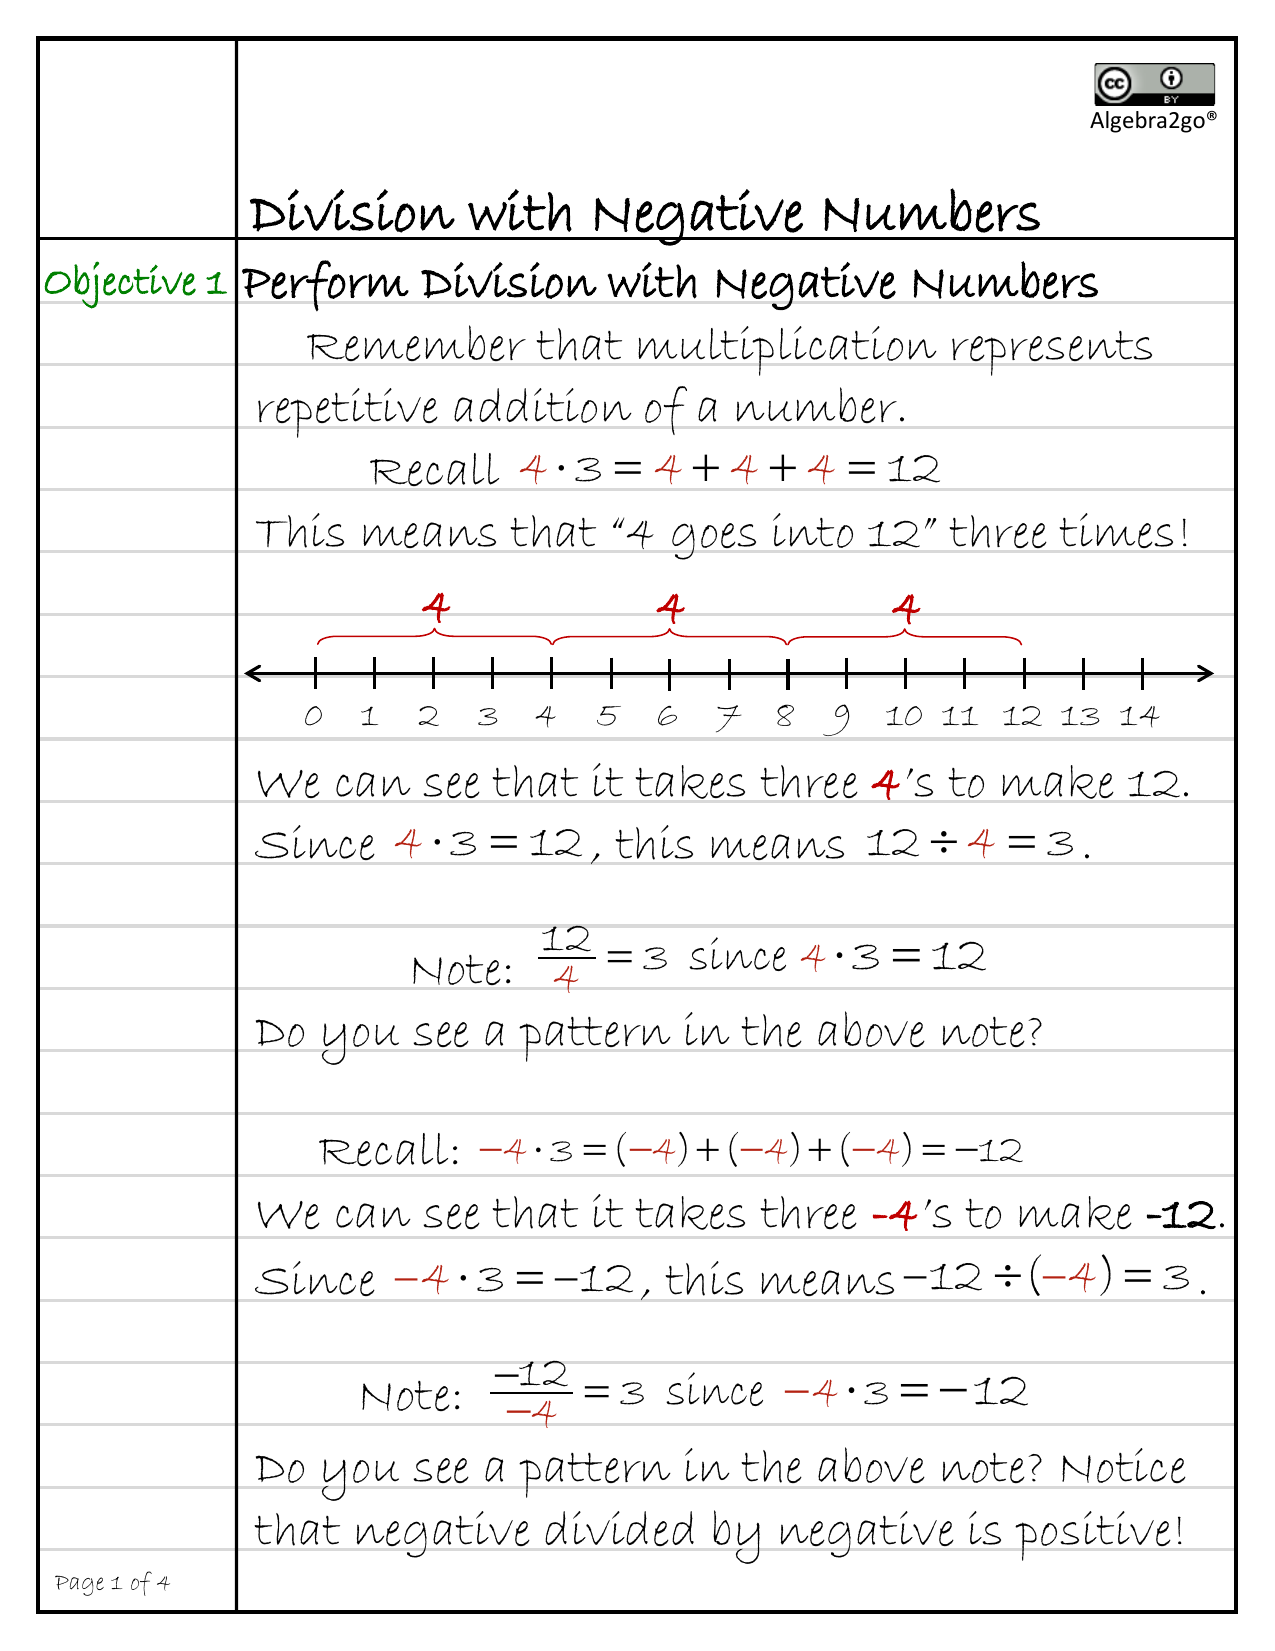 division-with-negative-numbers